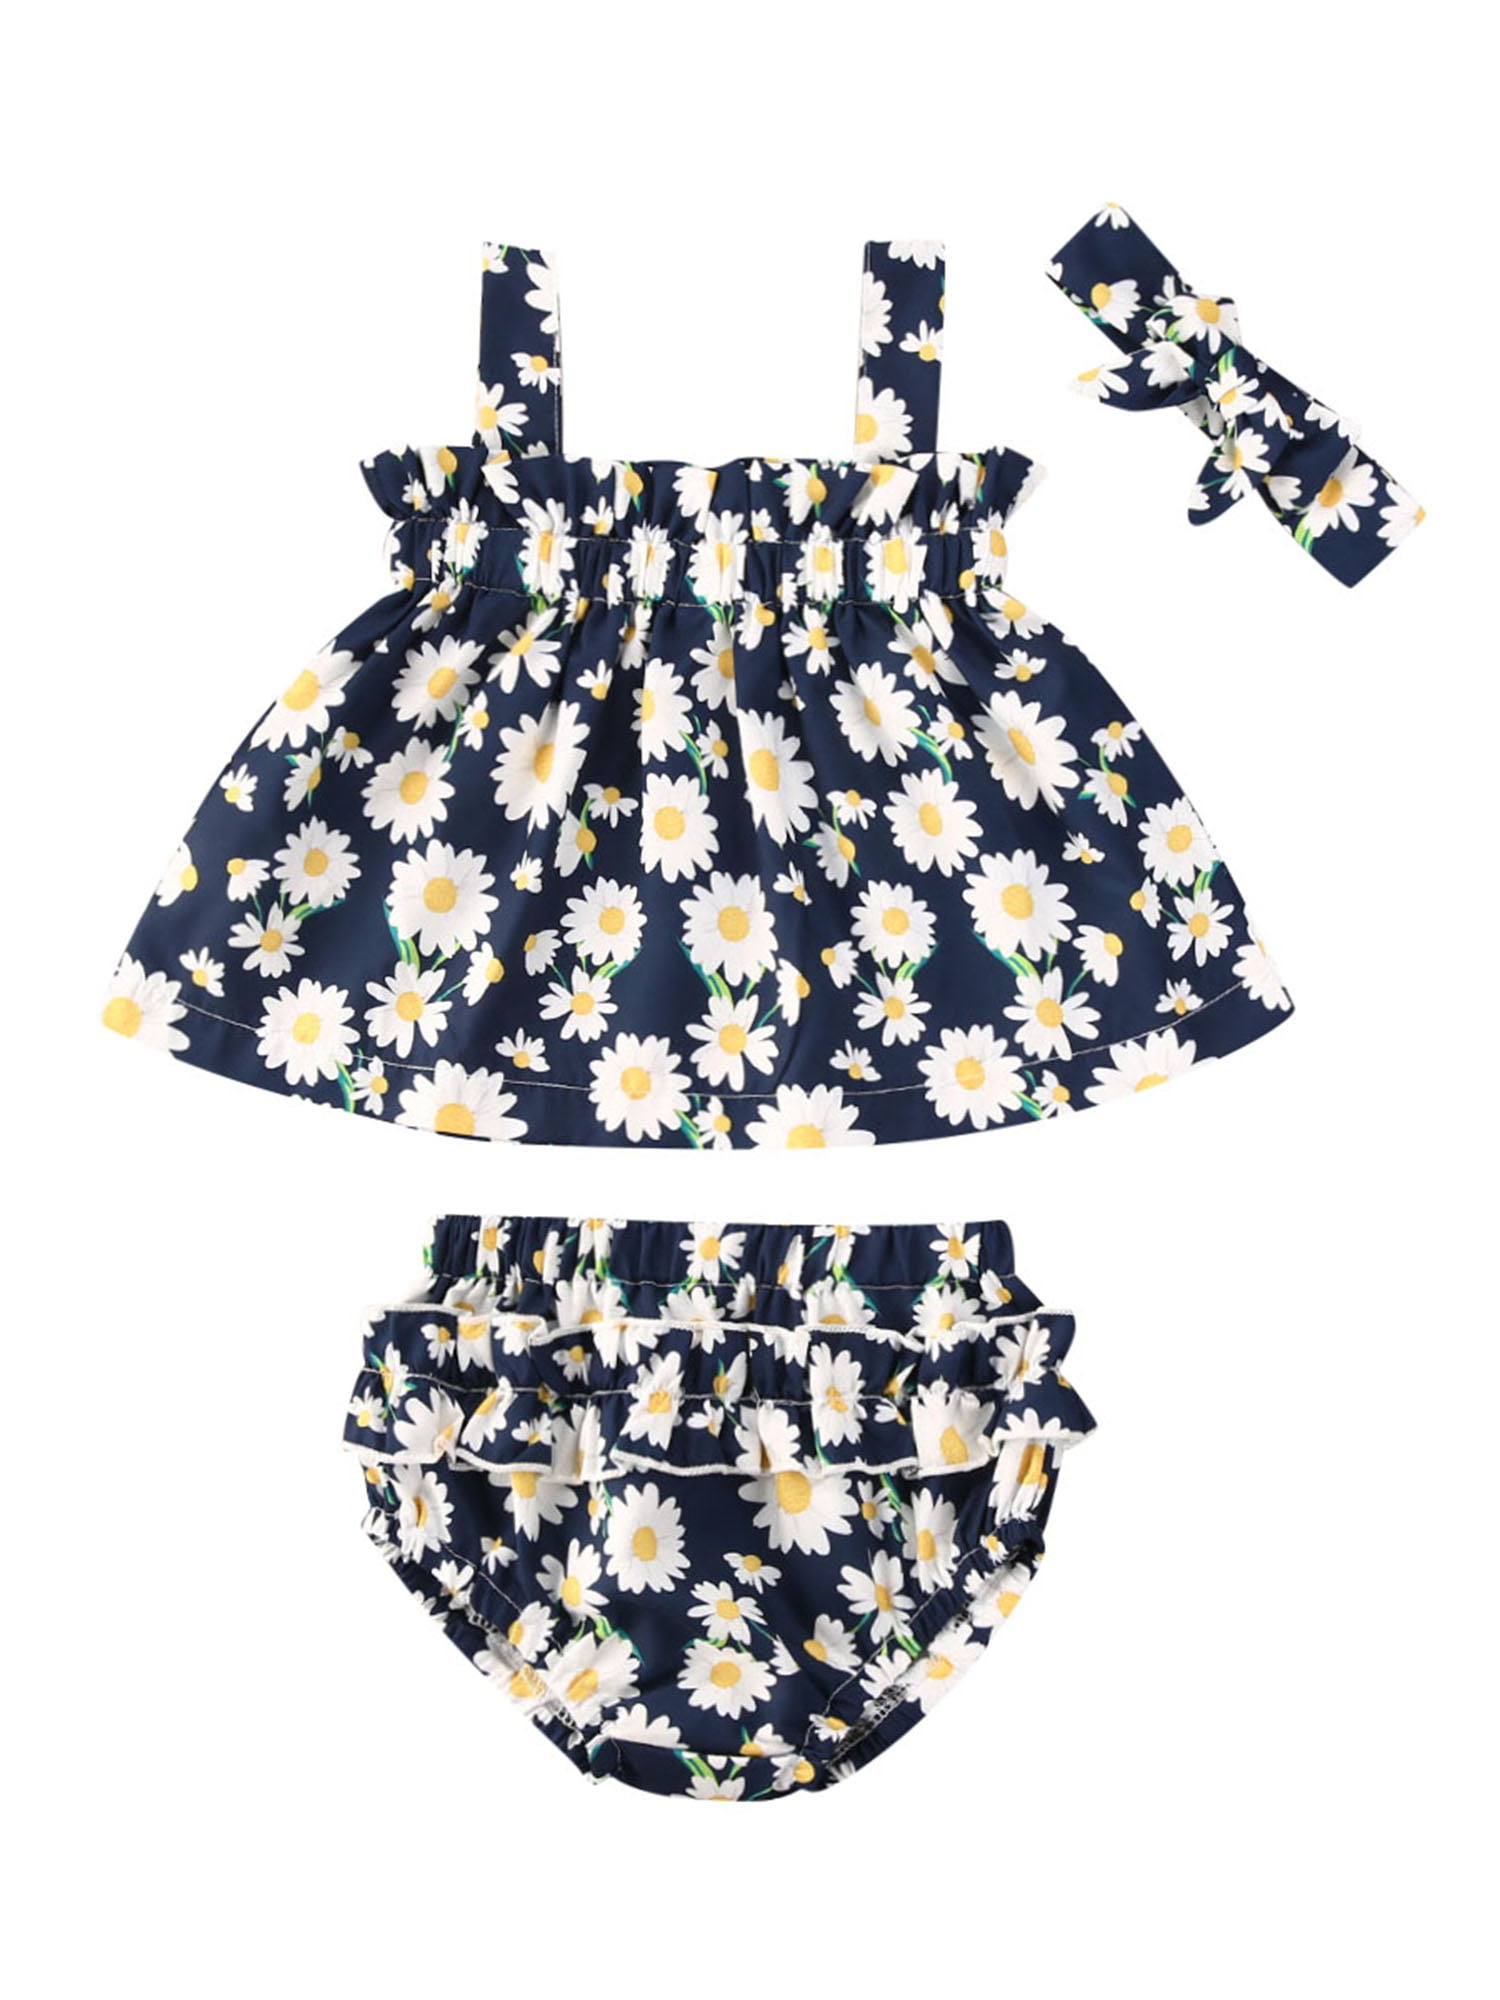 Girls Top Shorts Ditsy Flower Daisy Print Outfit Vest Baby Sun Set 3-18 Months